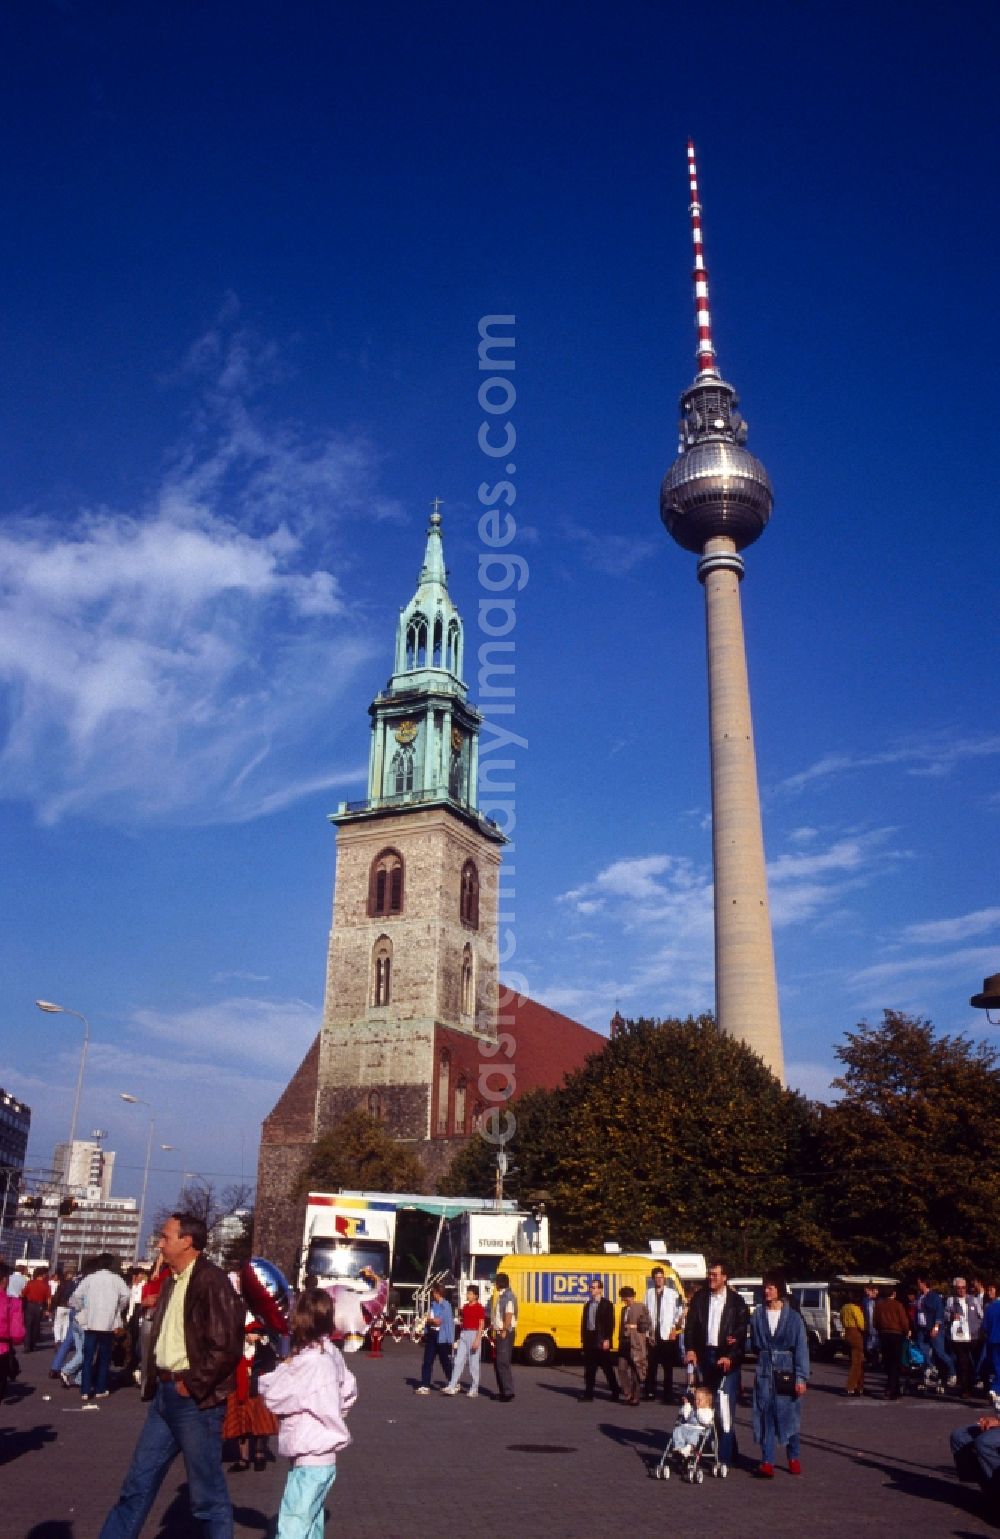 GDR picture archive: Berlin - Mitte - View of the TV tower with the Protestant Marienkirche in Berlin - Mitte. The Berlin TV Tower is the tallest building in Germany. As a politically simplistic ahmtes symbol of the GDR, the distinctive and influential city building has undergone a transition to the citywide icon in reunited Berlin